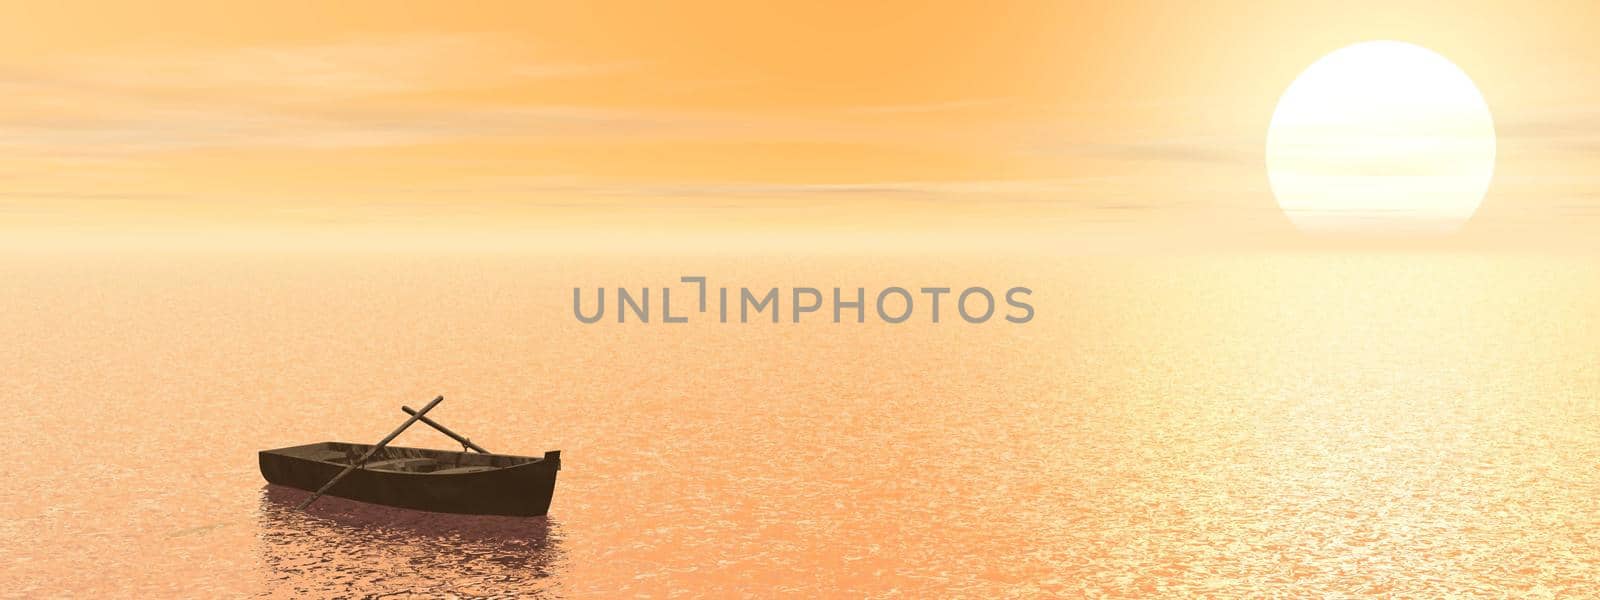 Old brown wood boat with two paddles staying on the quiet water by sunset